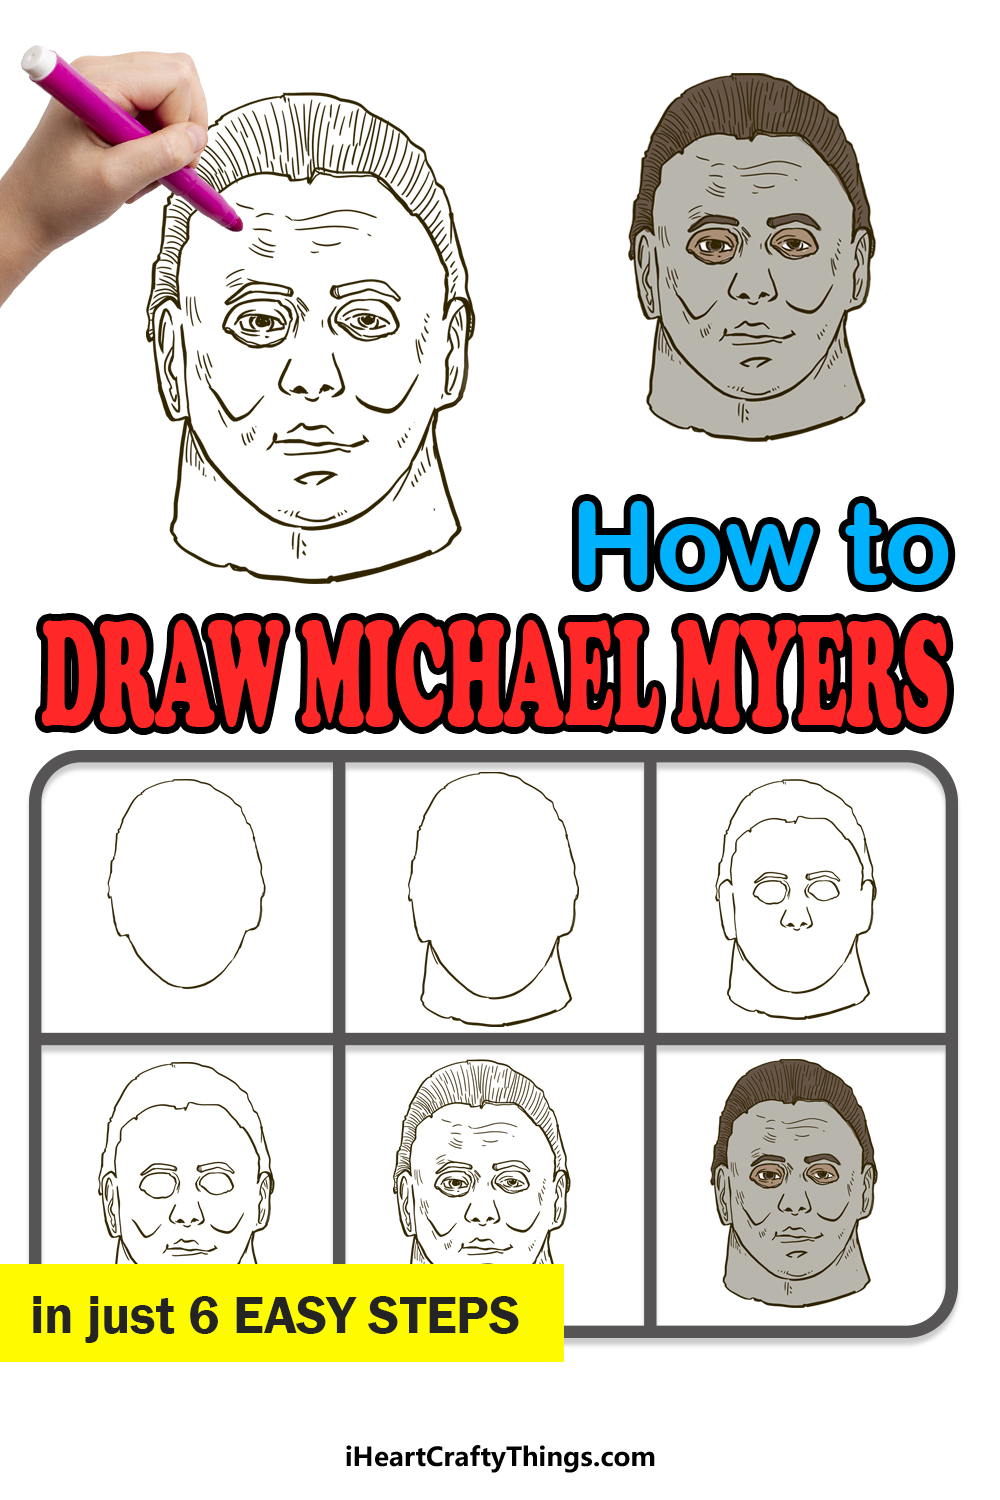 How to Draw Michael Myers step by step guide